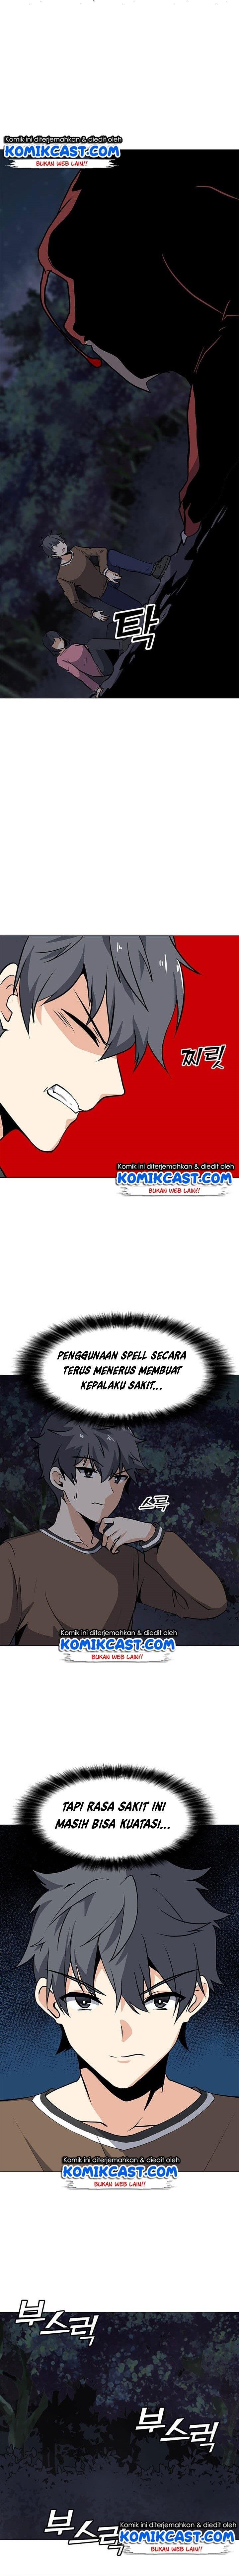 Solo Spell Caster Chapter 30